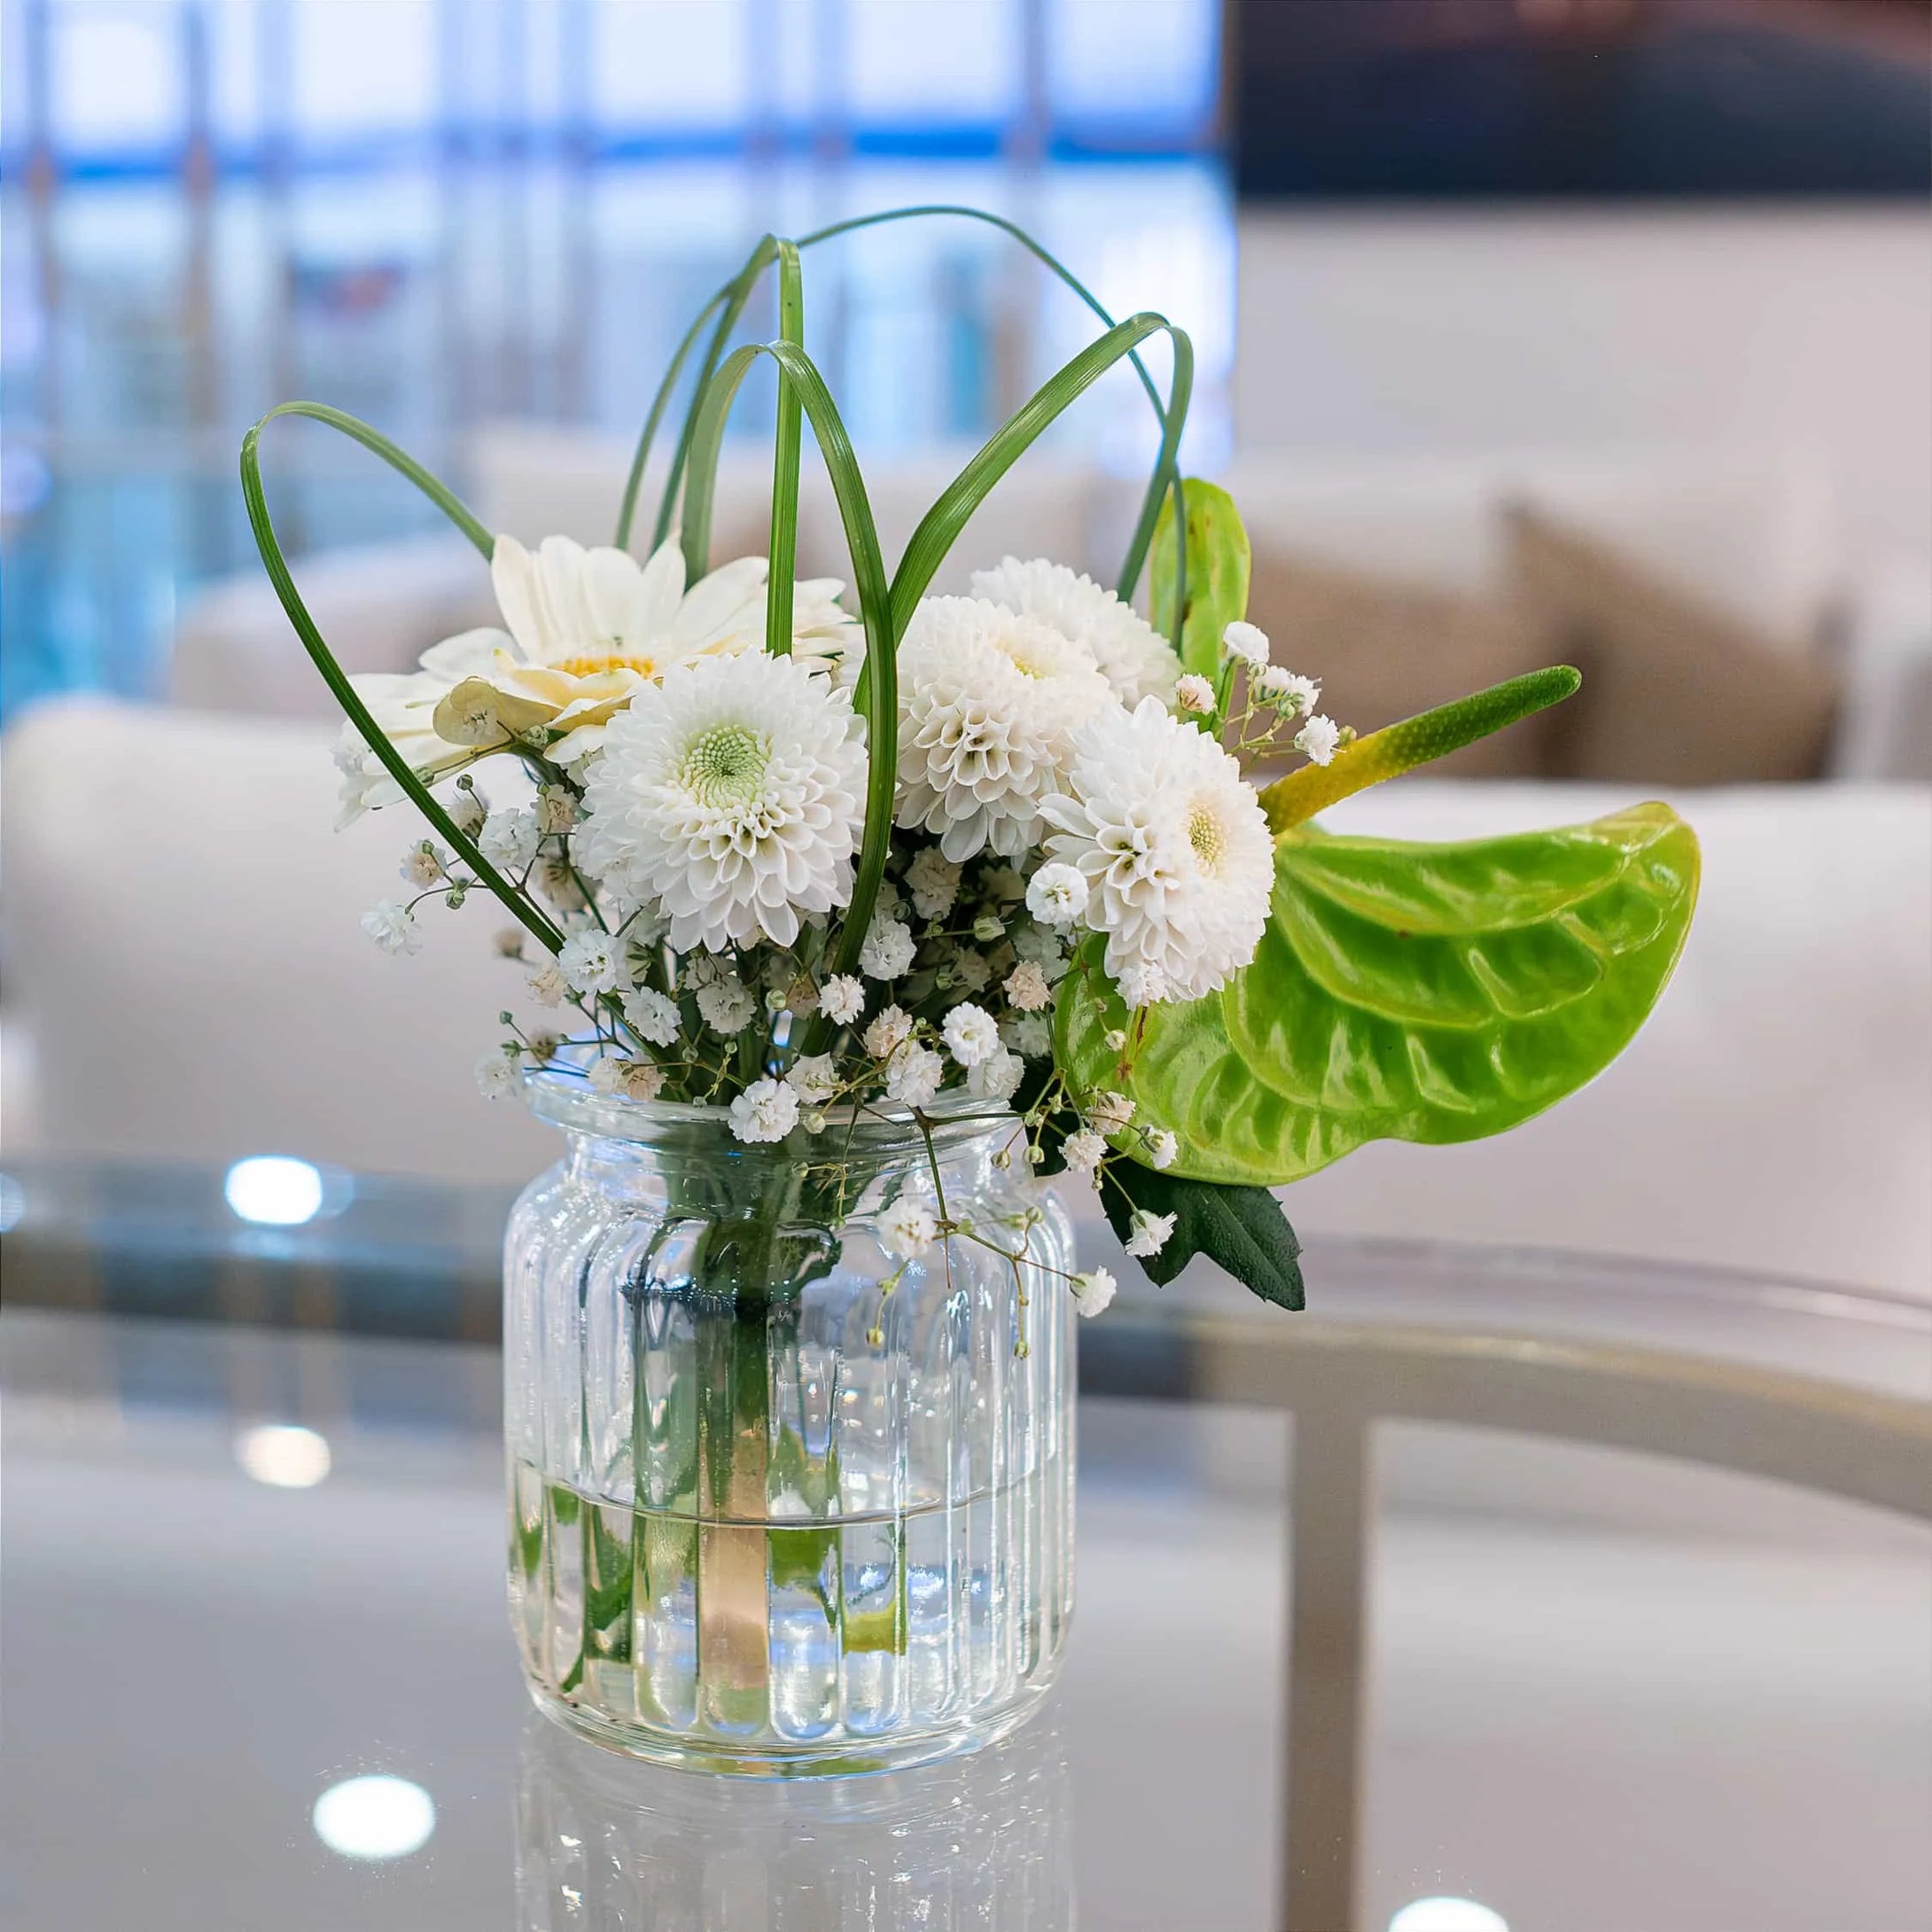 Pure white fresh flower bouquet, with white daisies at WTM in London, enhancing the corporate lounge area of this location of the event.